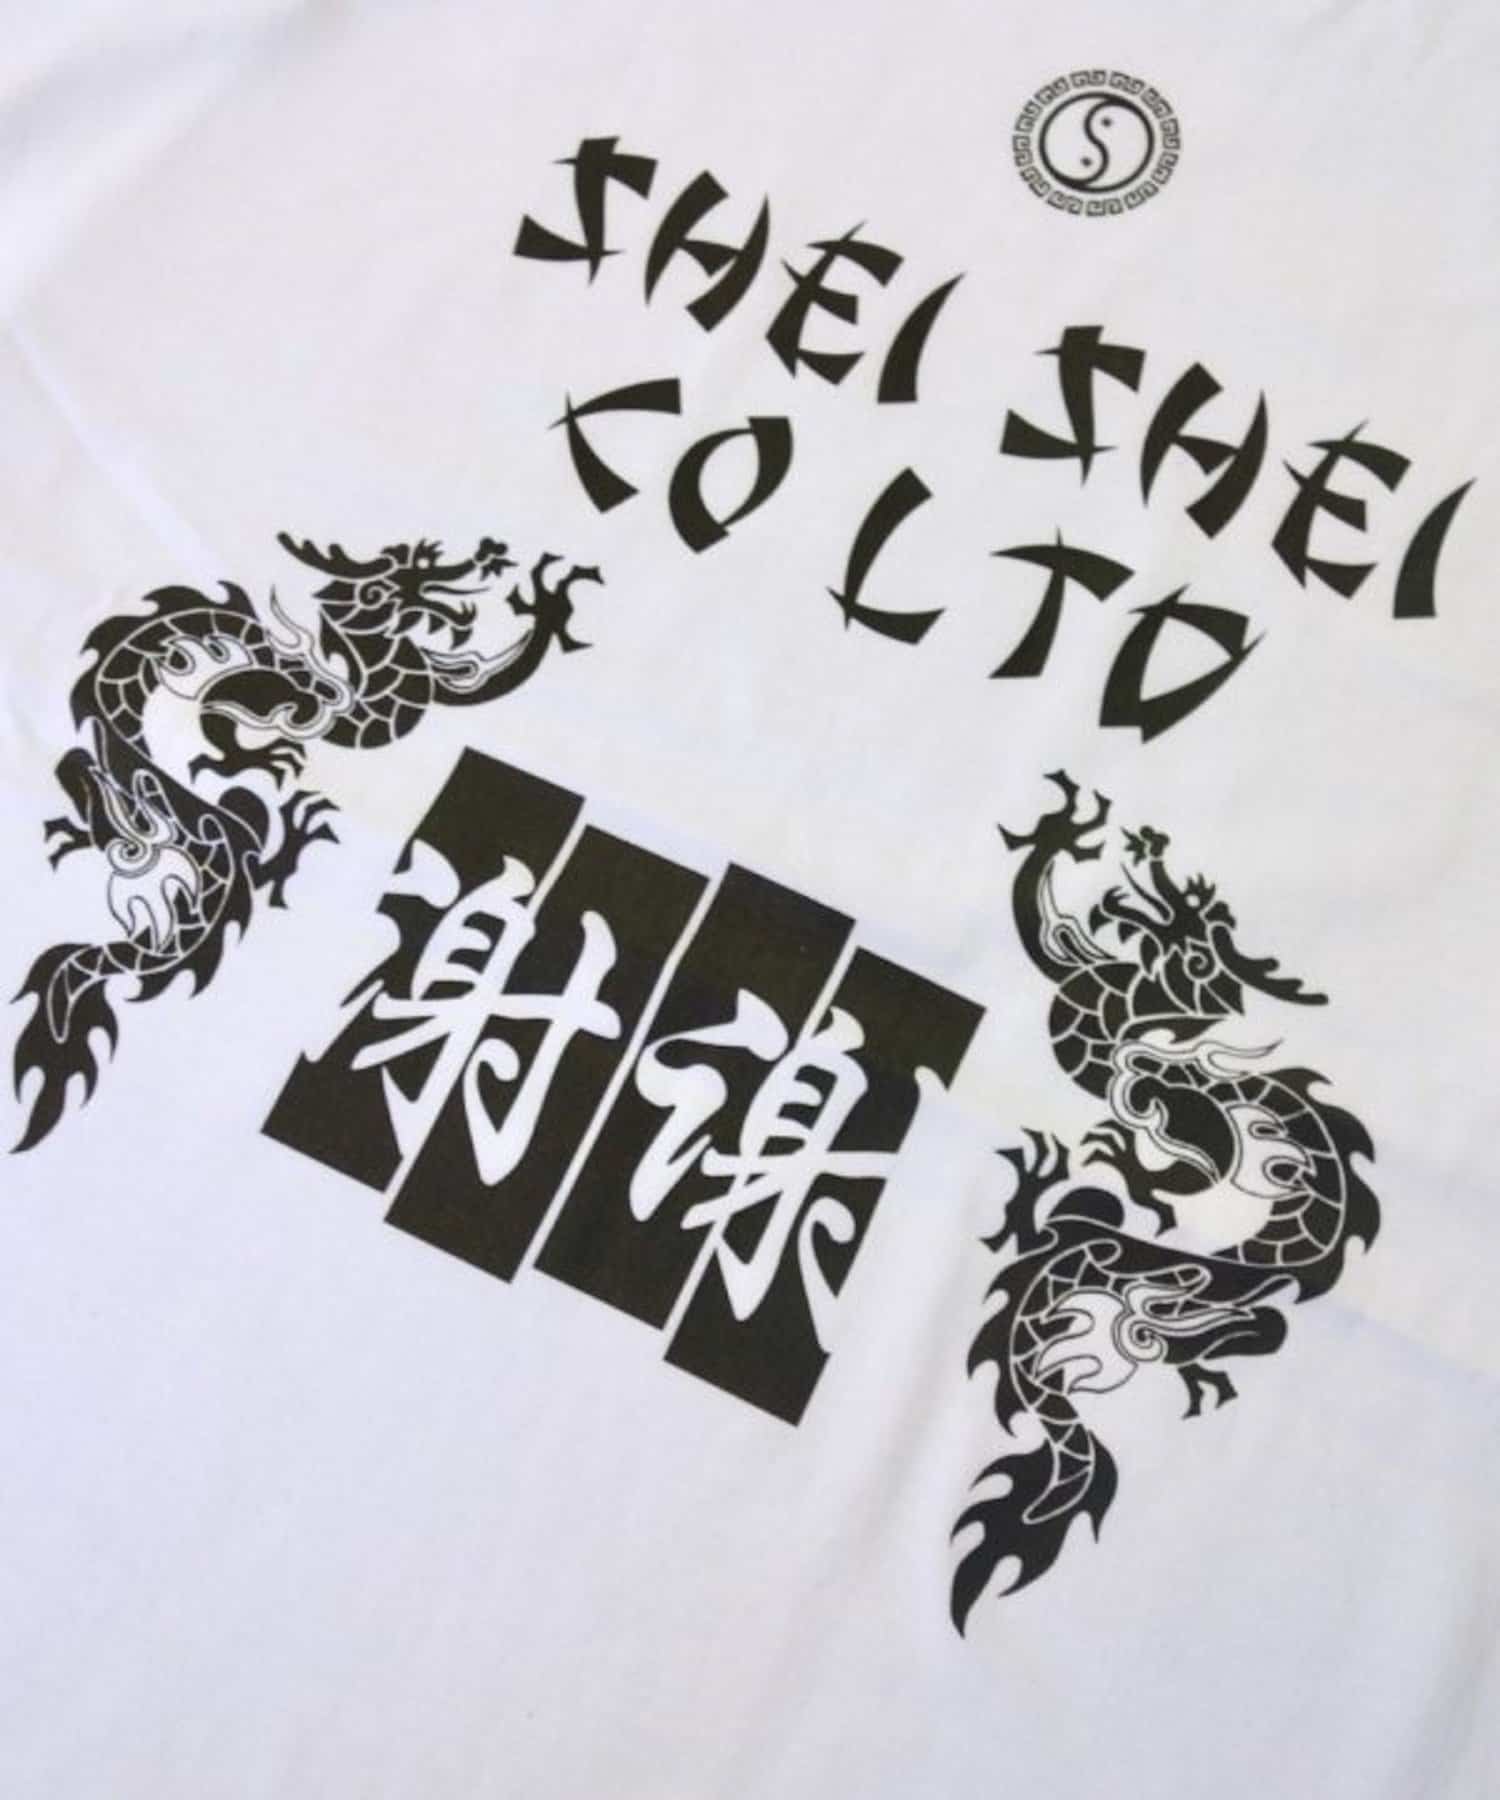 WHO’S WHO gallery(フーズフーギャラリー) 【SHEI SHEI/シェイシェイ】DRAGON L/S TEE